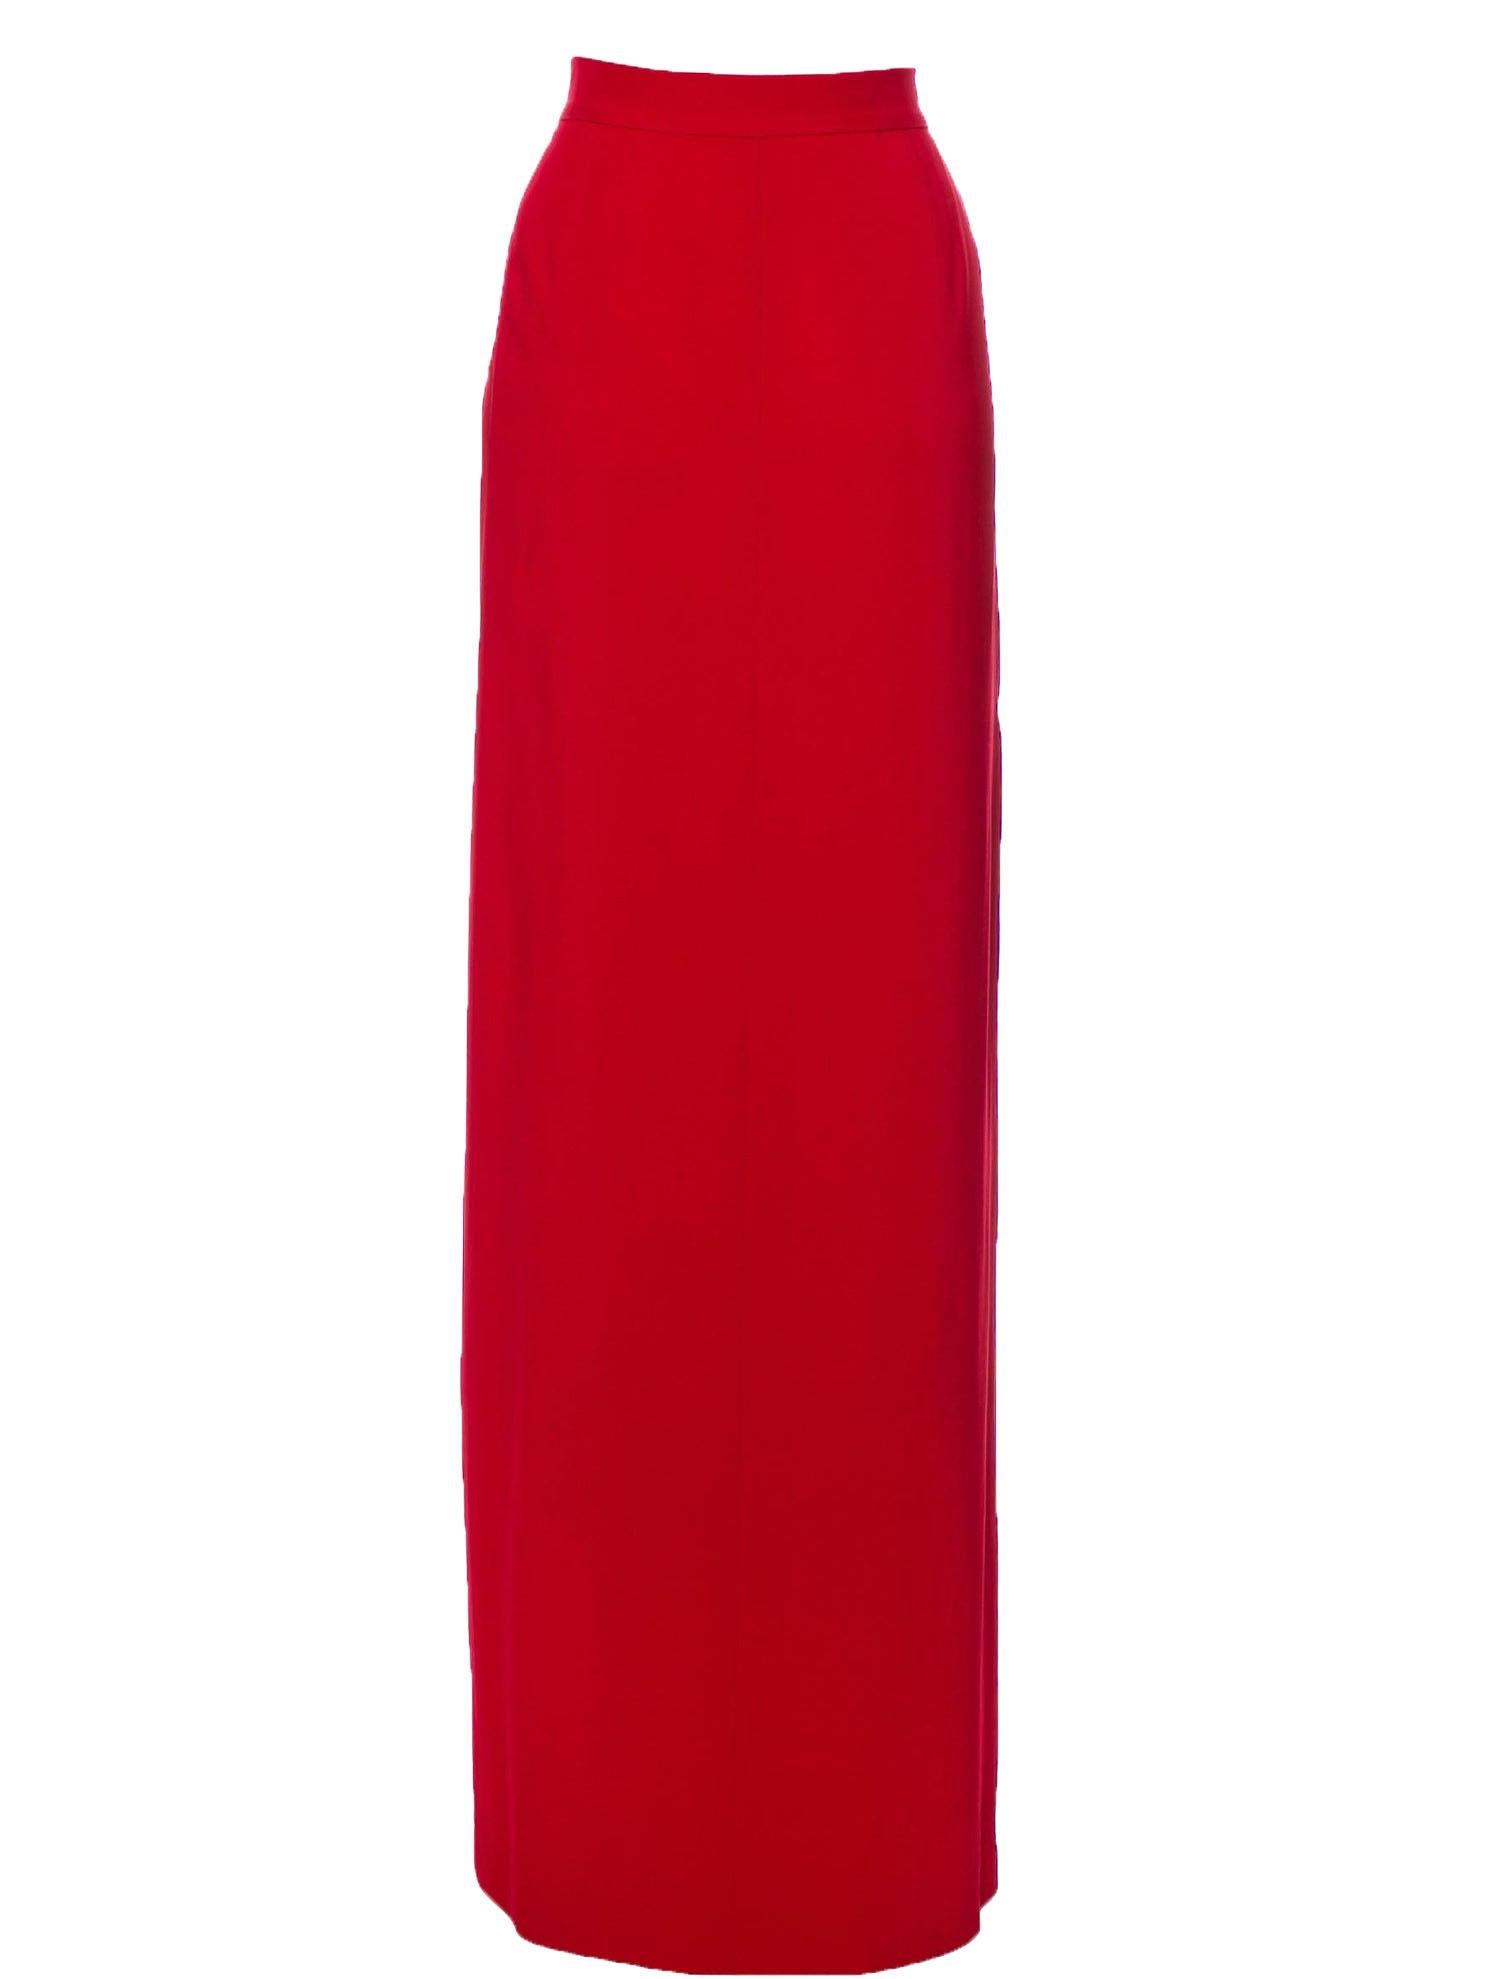 New Valentino Roma Maxi Red Skirt
Italian size 48 - US 12
Bow and ruffle accent, pleated, fully lined, stretch, 97% viscose, 3% elastane.
Measurements; length - 47 inches, waist - 34